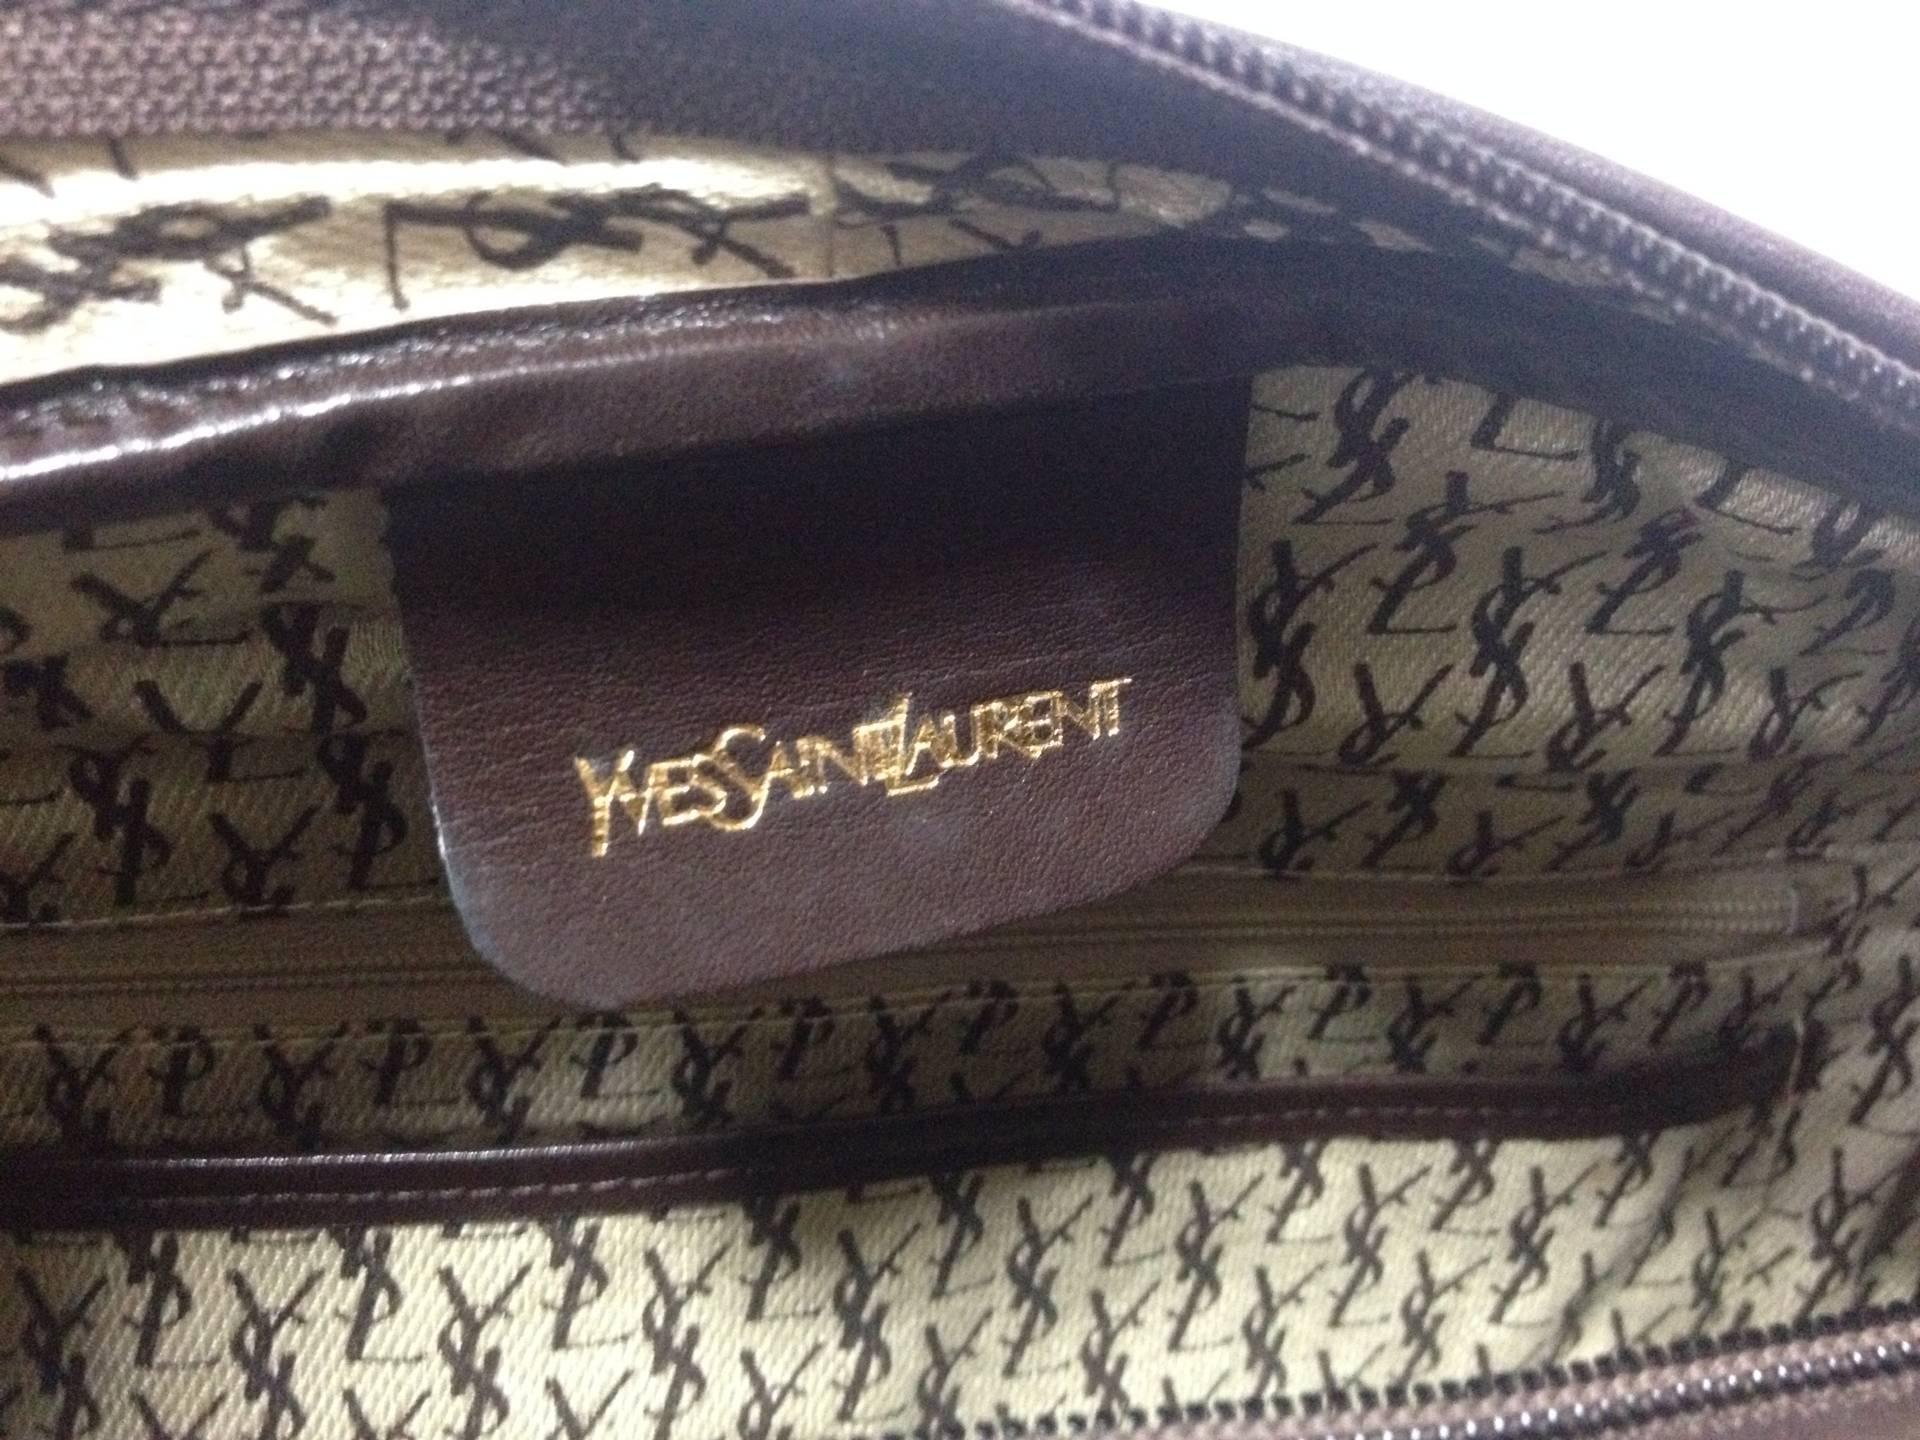 Vintage Yves Saint Laurent genuine dark brown leather daily use duffle bag. Clas In Good Condition For Sale In Kashiwa, Chiba